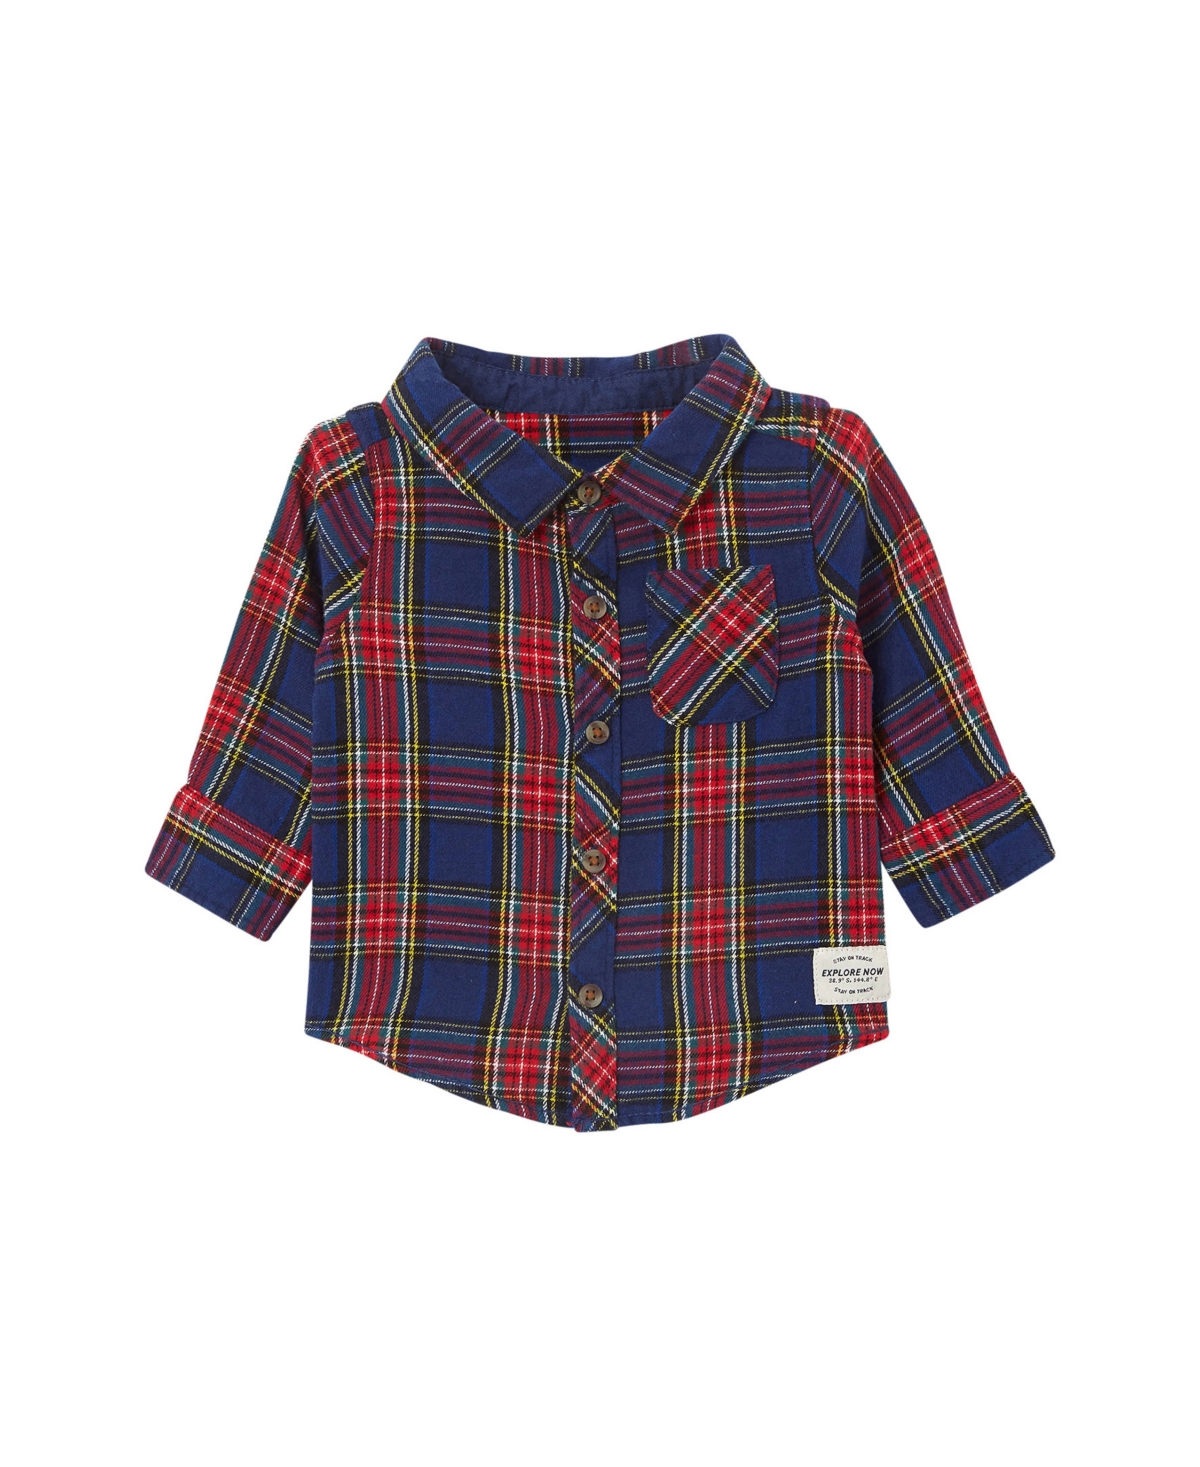 Cotton On Baby Boys Rugged Long Sleeves Shirt In In The Navy,heritage Red Plaid